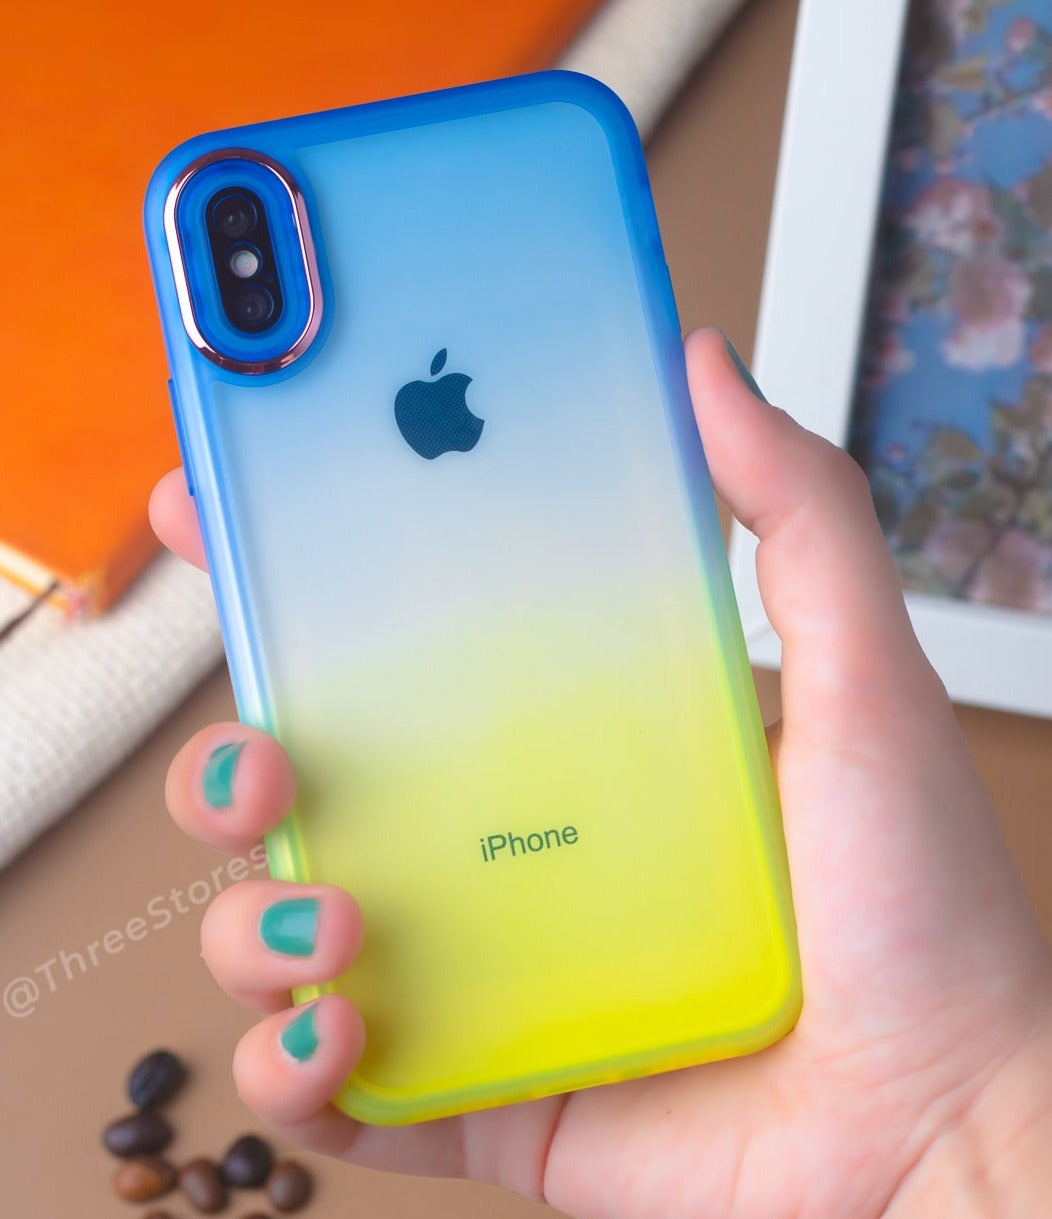 Q Series Vice City Colorful Protective Case iPhone X Three store